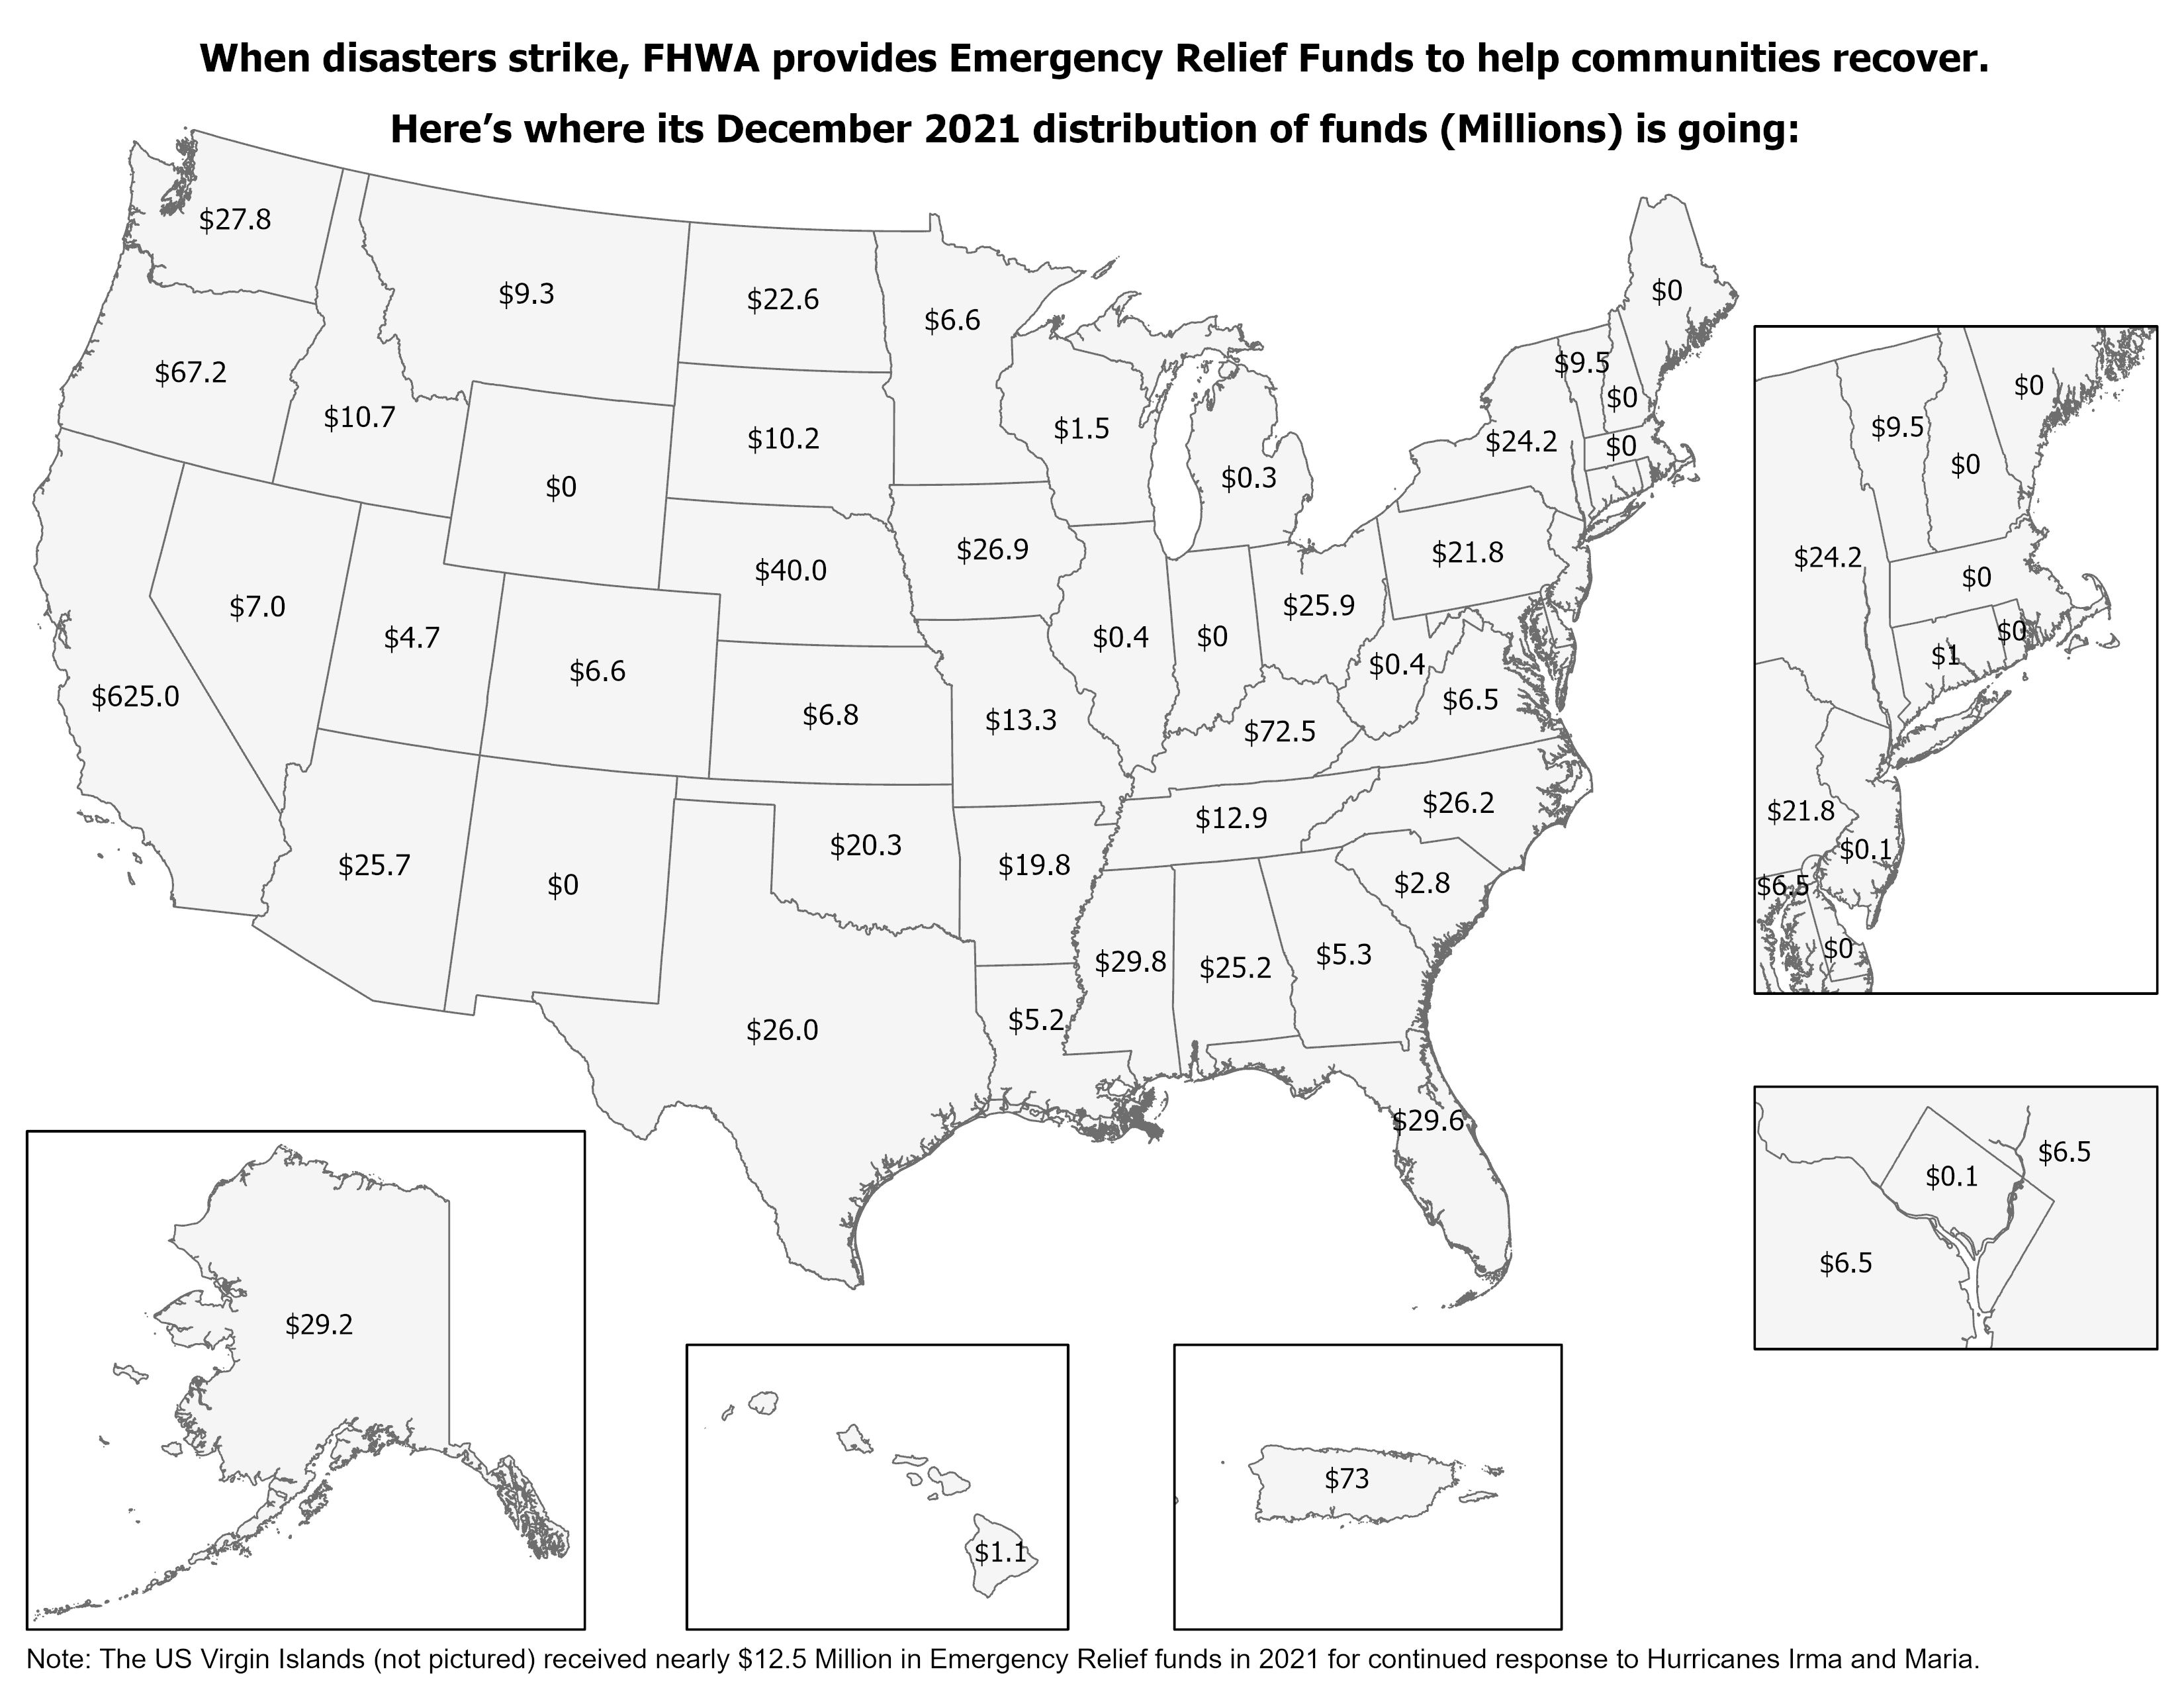 When disasters strike, FHWA provides Emergency Relief Funds to help communities recover. Here's where its December 2021 distribution of funds is going. Amounts received by state: California, 625 million; Puerto Rico, 73 million; Kentucky, 72.5 million; Oregon, 67.2 million; Nebraska, 40 million; Mississippi, 29.8 million; Florida, 29.6 million; Alaska, 29.2 million; Washington, 27.8 million; Iowa, 26.9 million; North Carolina, 26.2 million; Texas, 26 million; Ohio, 25.9 million; Arizona, 25.7 million; Alabama, 25.2 million; New York, 24.2 million; North Dakota, 22.6 million; Pennsylvania, 21.8 million; Oklahoma, 20.3 million; Arkansas, 19.8 million; Missouri, 13.3 million; Tennessee, 12.9 million; Virgin Islands, 12.5 million; Idaho, 10.7 million; South Dakota, 10.2 million; Vermont, 9.5 million; Montana, 9.3 million; Nevada, 7 million; Kansas, 6.8 million; Minnesota, 6.6 million; Colorado, 6.6 million; Maryland, 6.5 million; Virginia, 6.5 million; Georgia, 5.3 million; Louisiana, 5.2 million; Utah, 4.7 million; South Carolina, 2.8 million; Wisconsin, 1.5 million; Hawaii, 1.1 million; Connecticut, 1 million; West Virginia, 0.4 million; Illinois, 0.4 million; Michigan, 0.3 million; District of Columbia, 0.1 million; New Jersey, 0.1 million; Delaware, 0 million; Indiana, 0 million; Maine, 0 million; Massachusetts, 0 million; New Hampshire, 0 million; New Mexico, 0 million; Rhode Island, 0 million; Wyoming, 0 million; American Samoa, 0 million; Guam, 0 million. Note: the U.S. Virgin Islands received nearly $12.5 Million in Emergency Relief funds in 2021 for continued response to Hurricanes Irma and Maria.